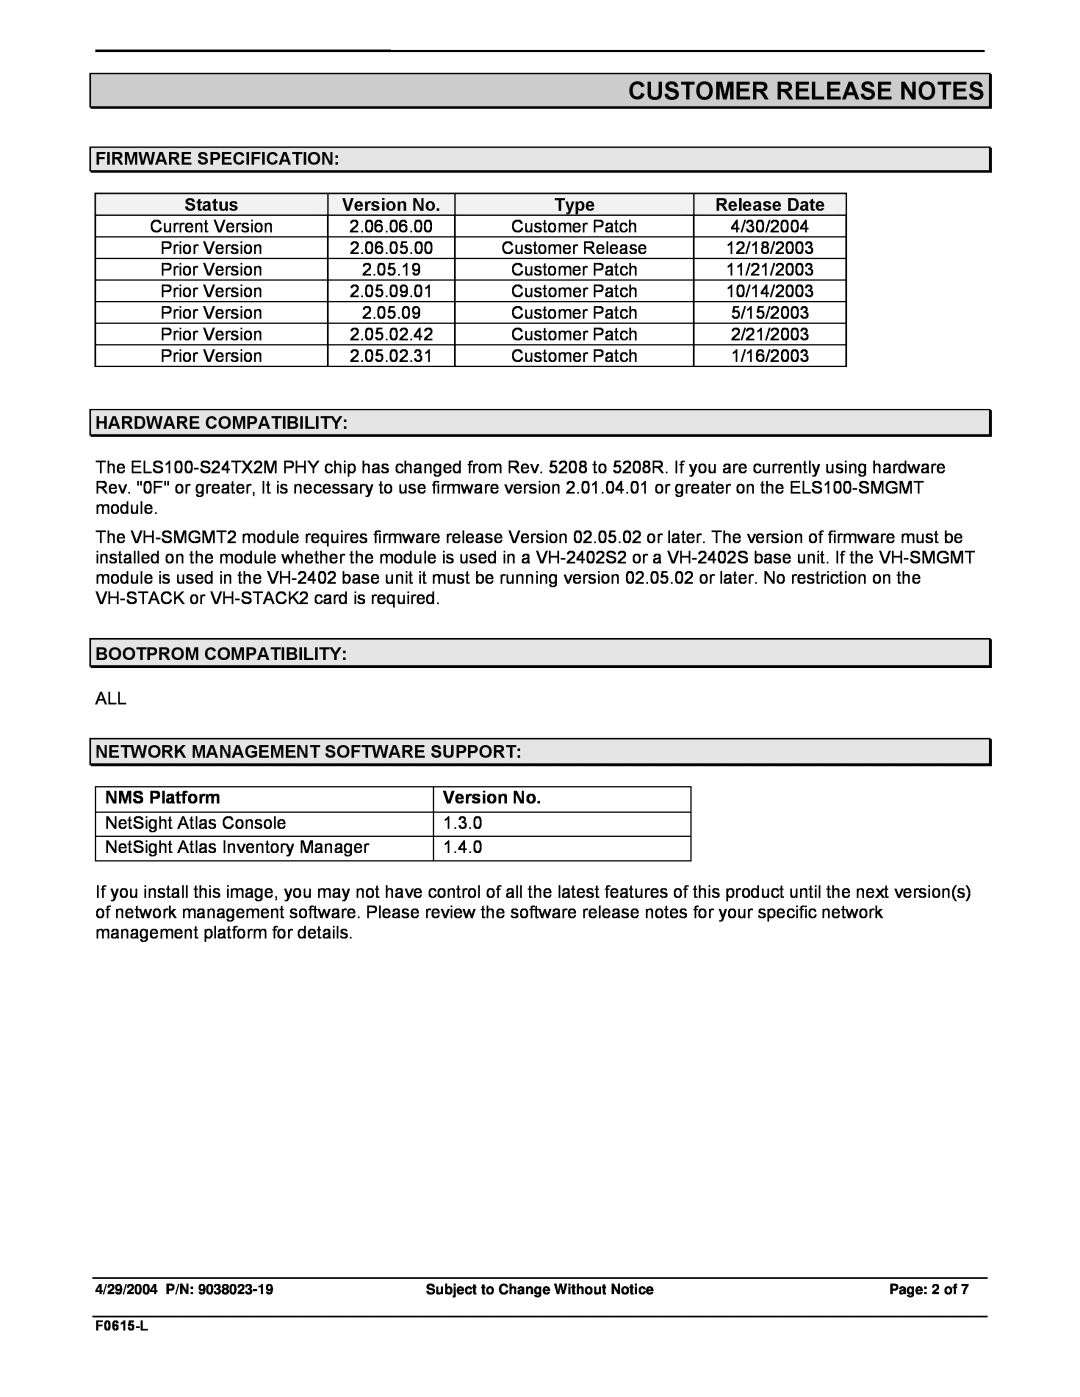 Enterasys Networks VH-2402S2 manual Customer Release Notes, Page 2 of 